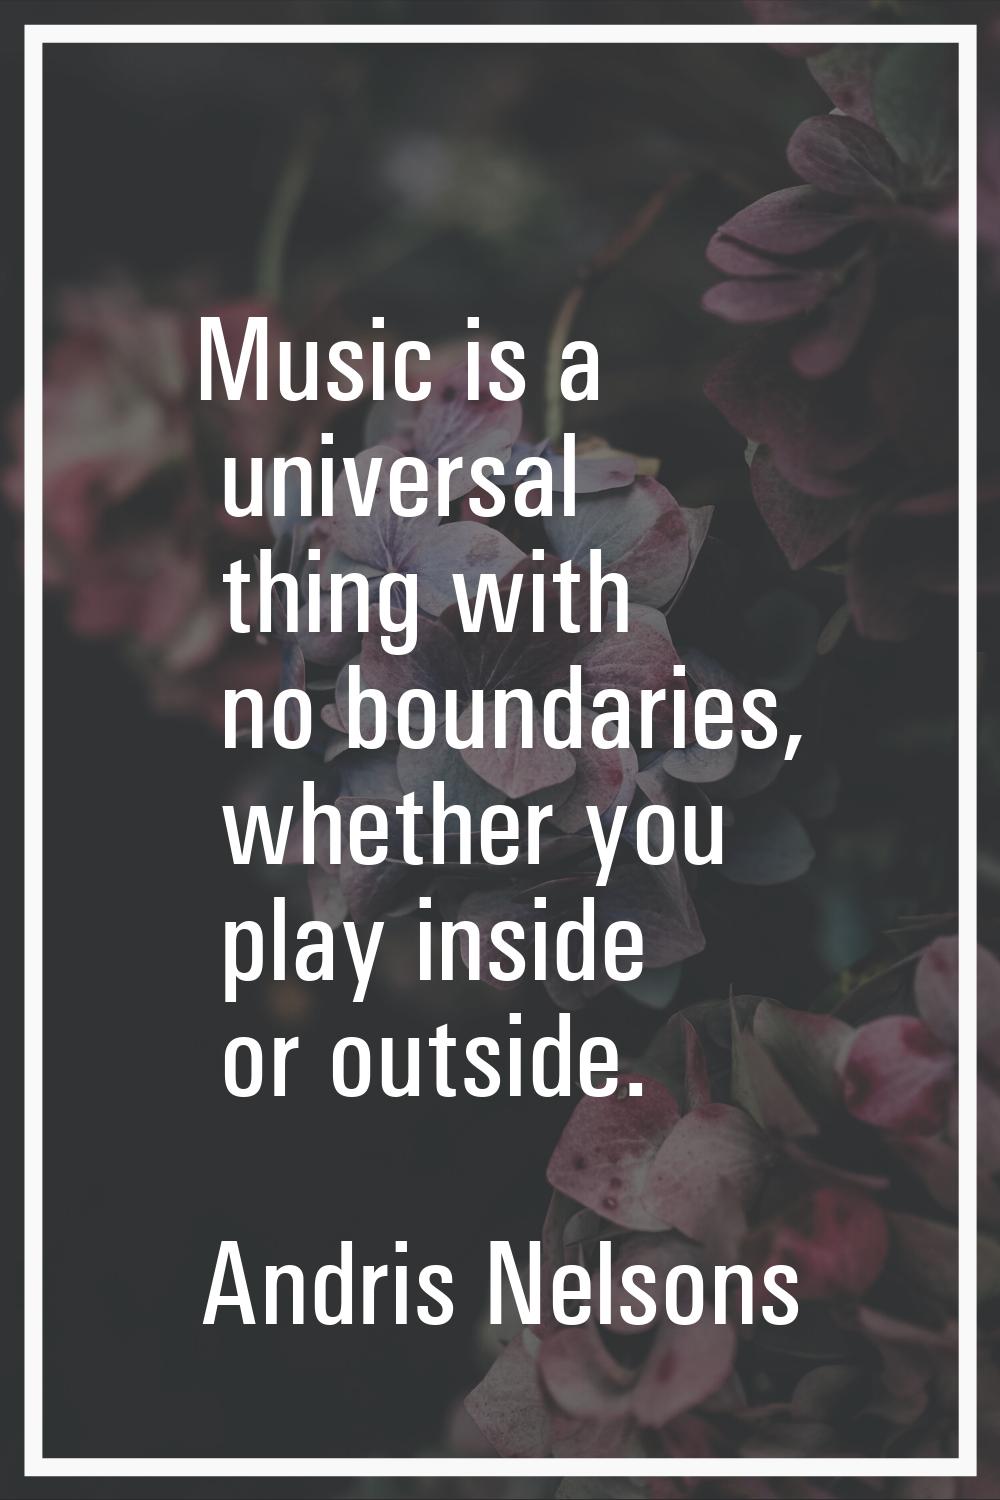 Music is a universal thing with no boundaries, whether you play inside or outside.